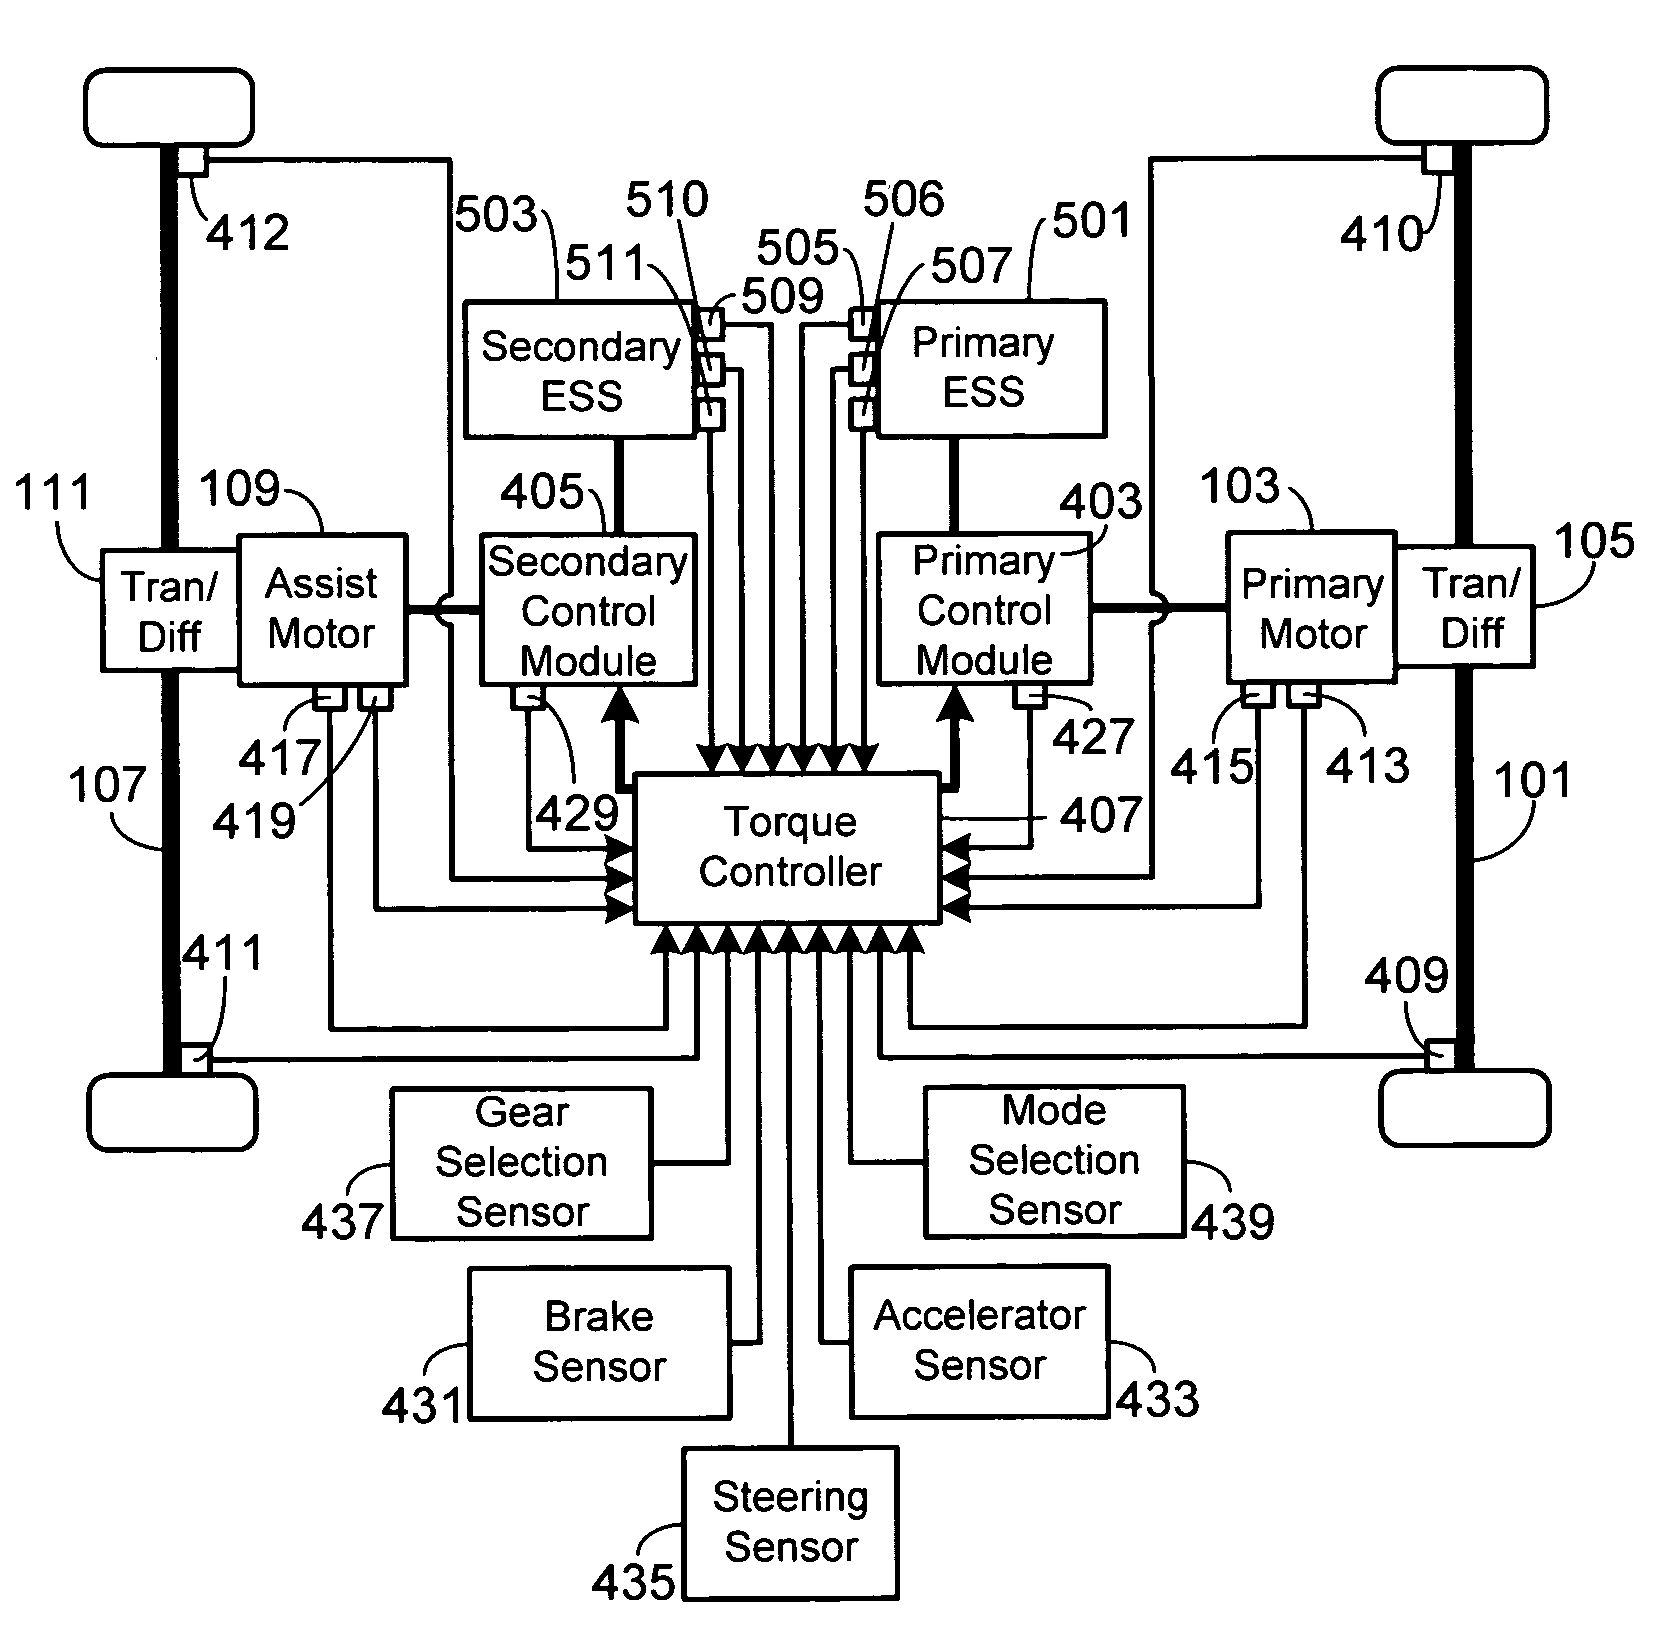 Control system for an all-wheel drive electric vehicle